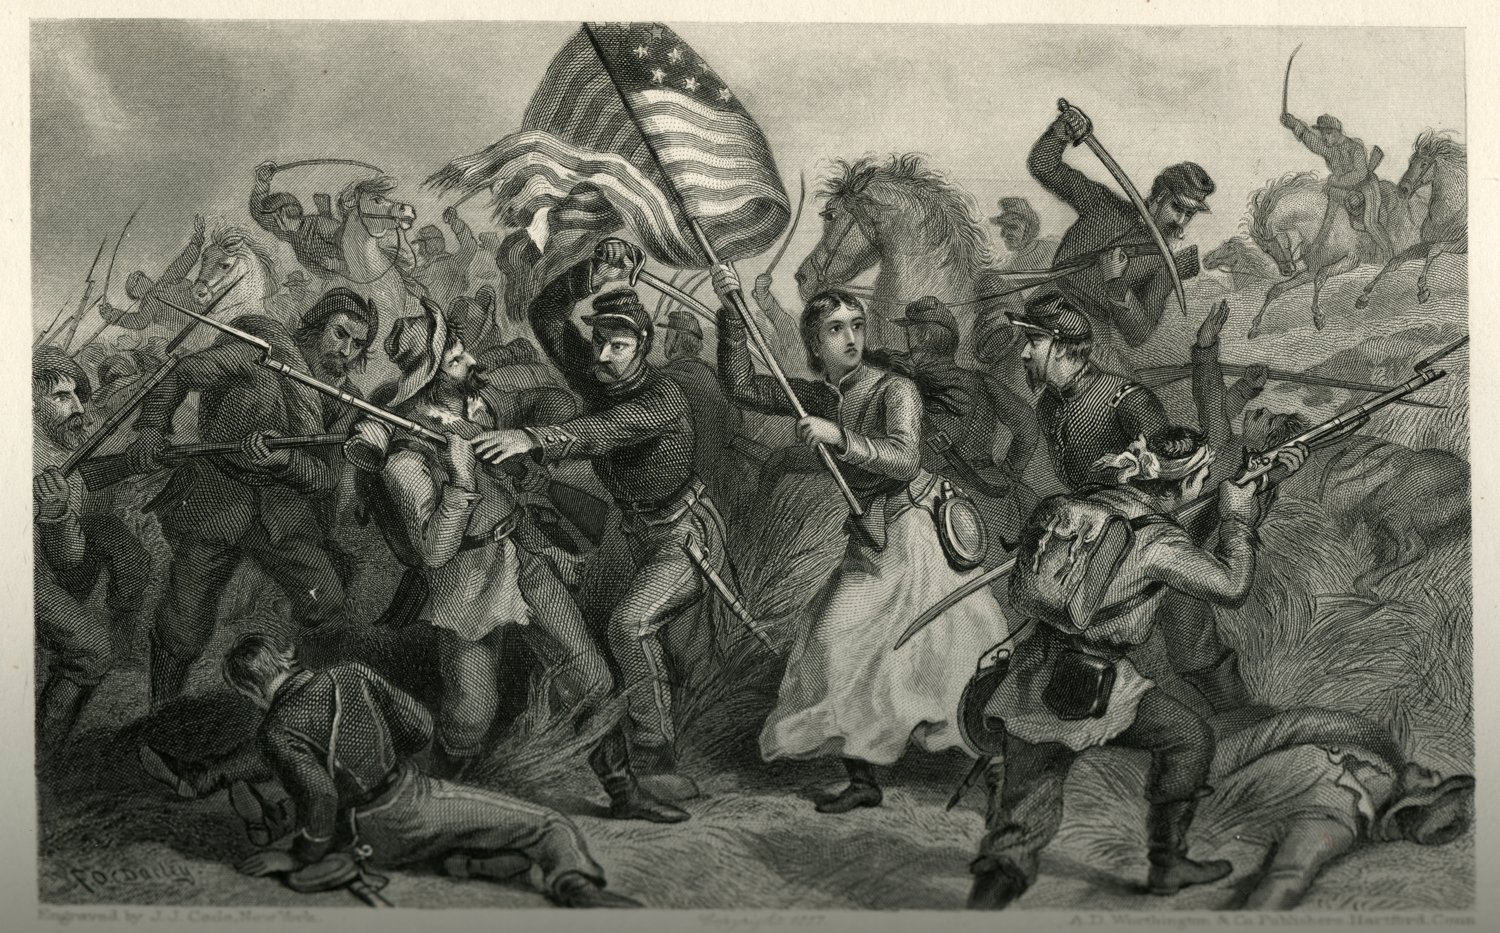 Felix Octavius Carr Darley and John J. Cade, A Woman in Battle: Michigan Bridget Carrying the Flag, 1887, engraving from a sketch from Mary A. Livermore, My Story of the War: A Woman's Narrative of Four Years Personal Experience, Hartford: A.D. Worthingon and Company, 1889, p. 117 (Newberry Library)